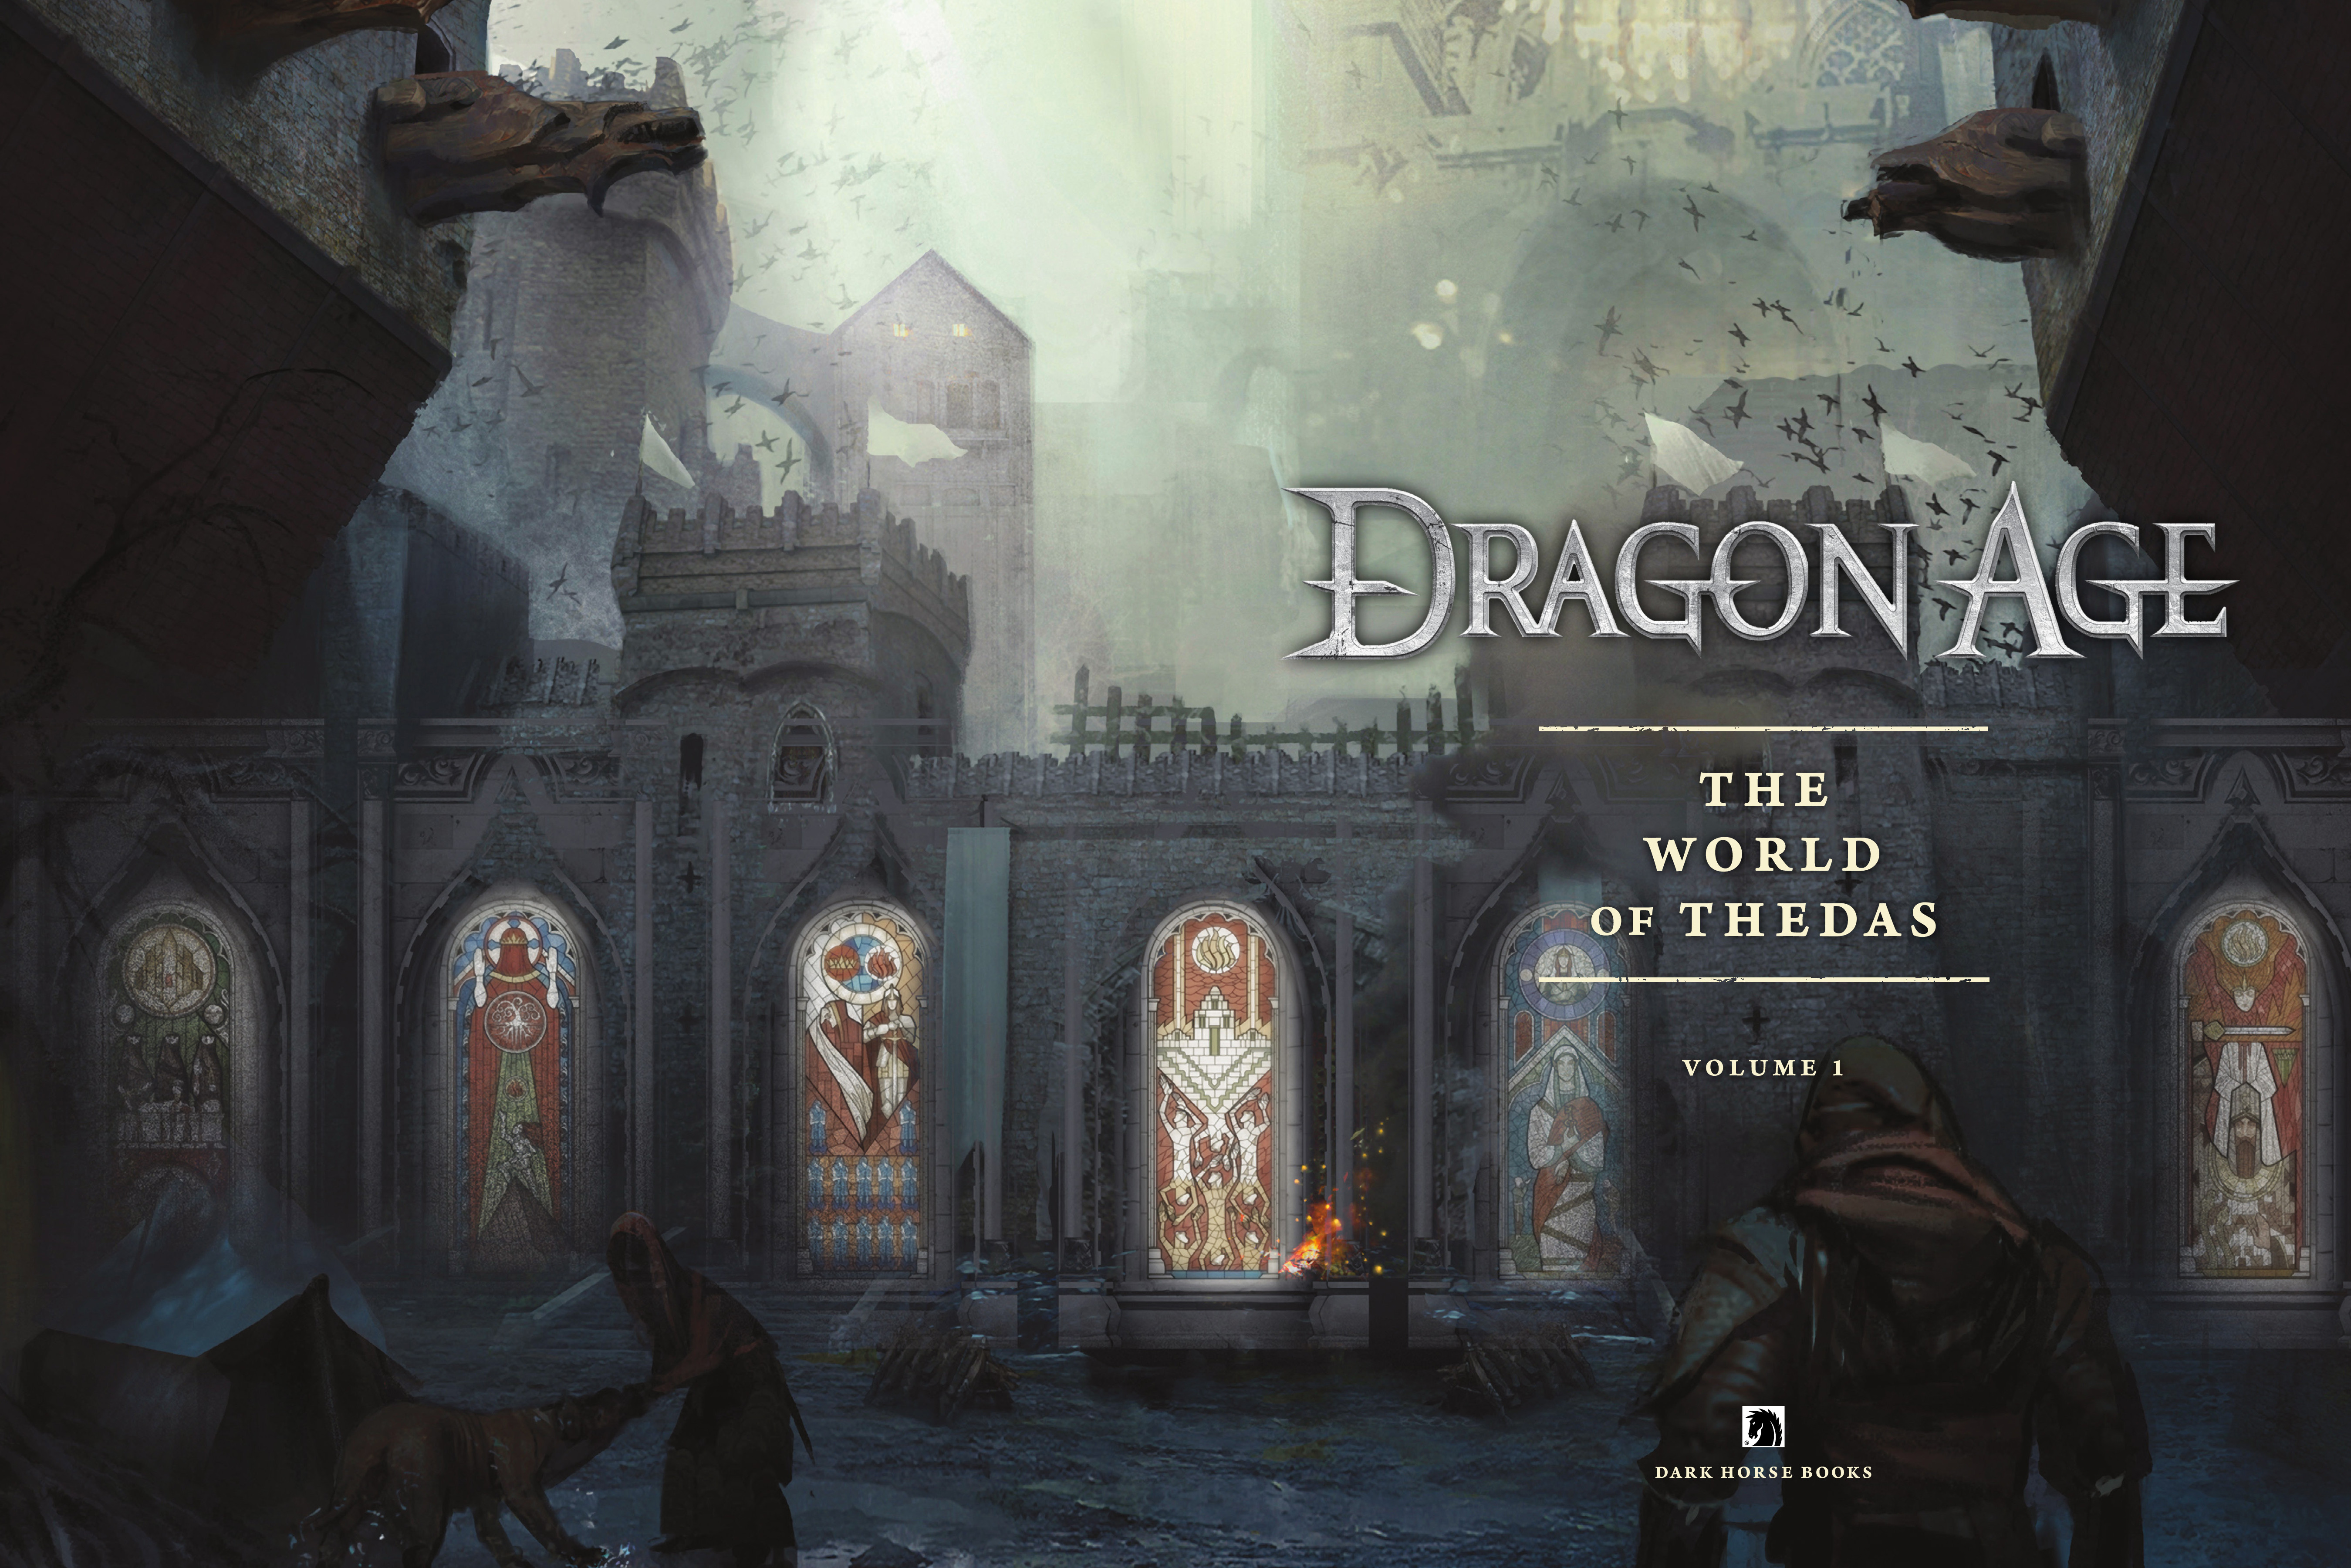 Read online Dragon Age: The World of Thedas comic -  Issue # TPB 1 - 4